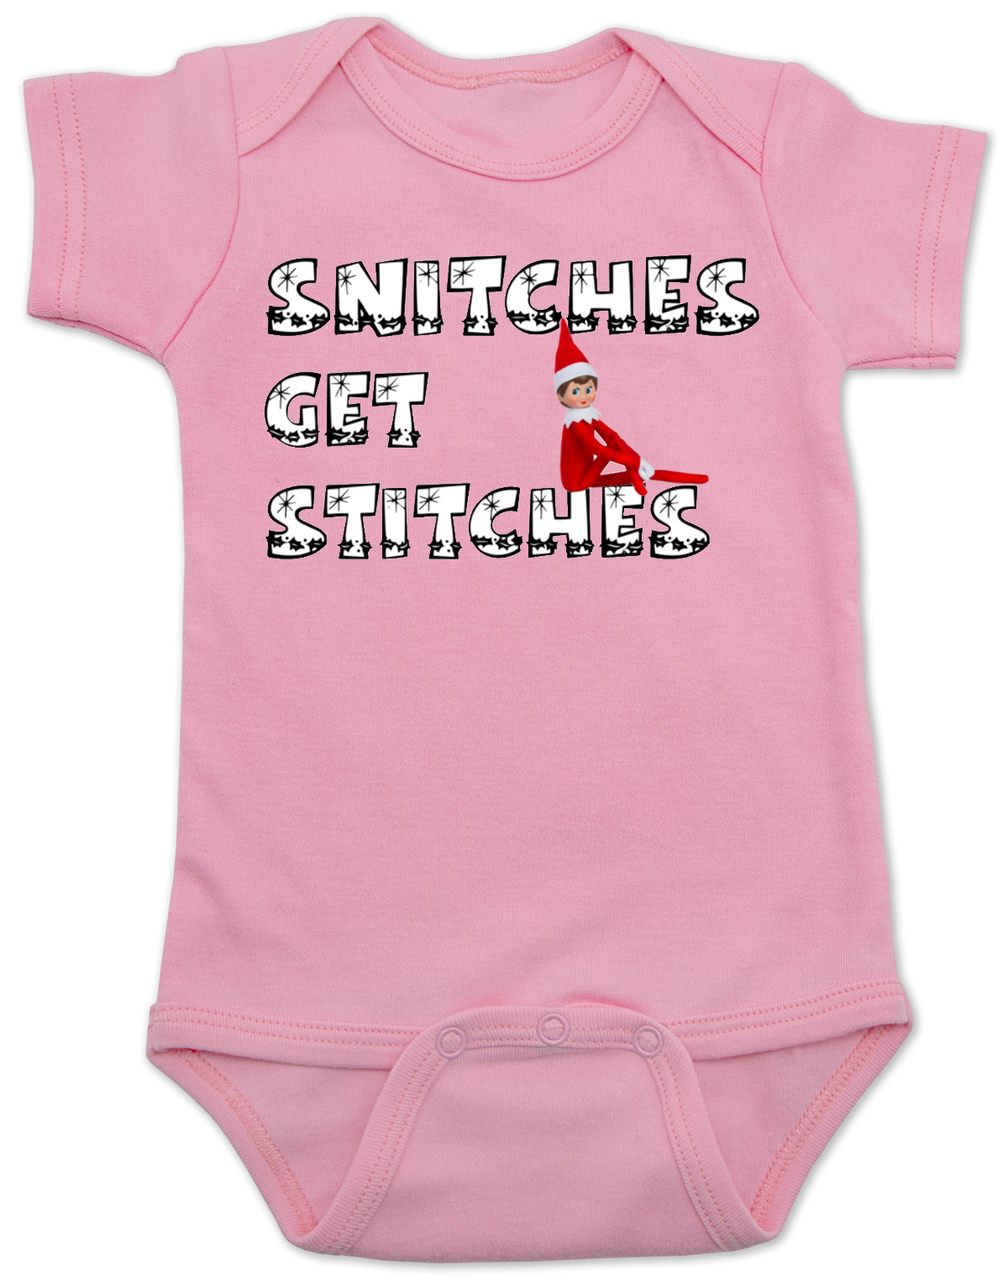 Snitches get Stitches - baby onesie and toddler shirt